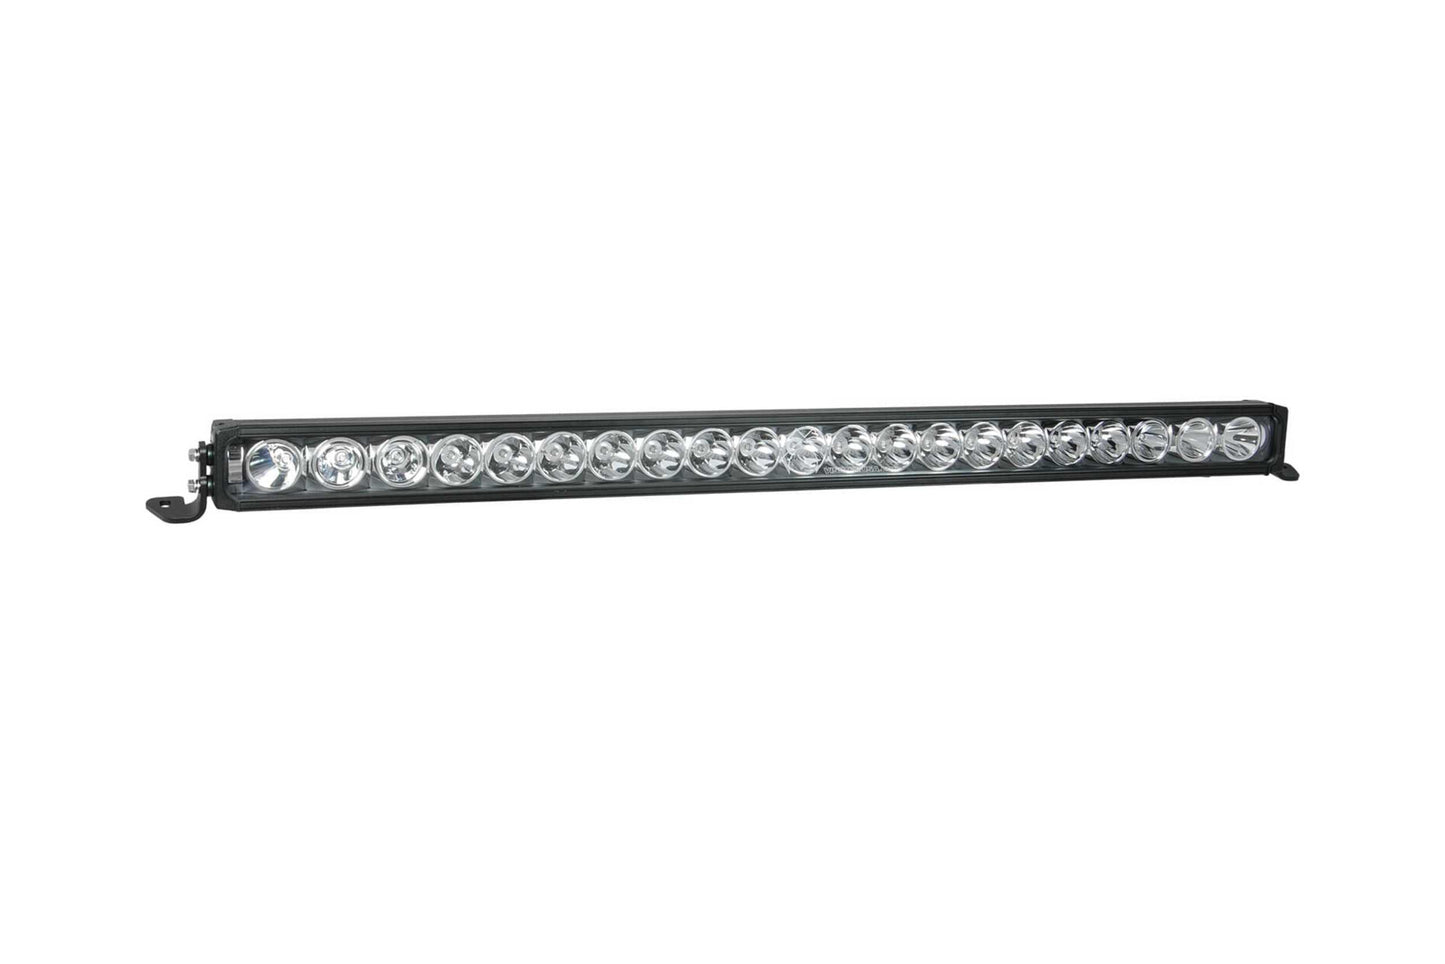 Vision X Light Bar: 25in (12-LED / XPR / Mixed Beam / with Halo)